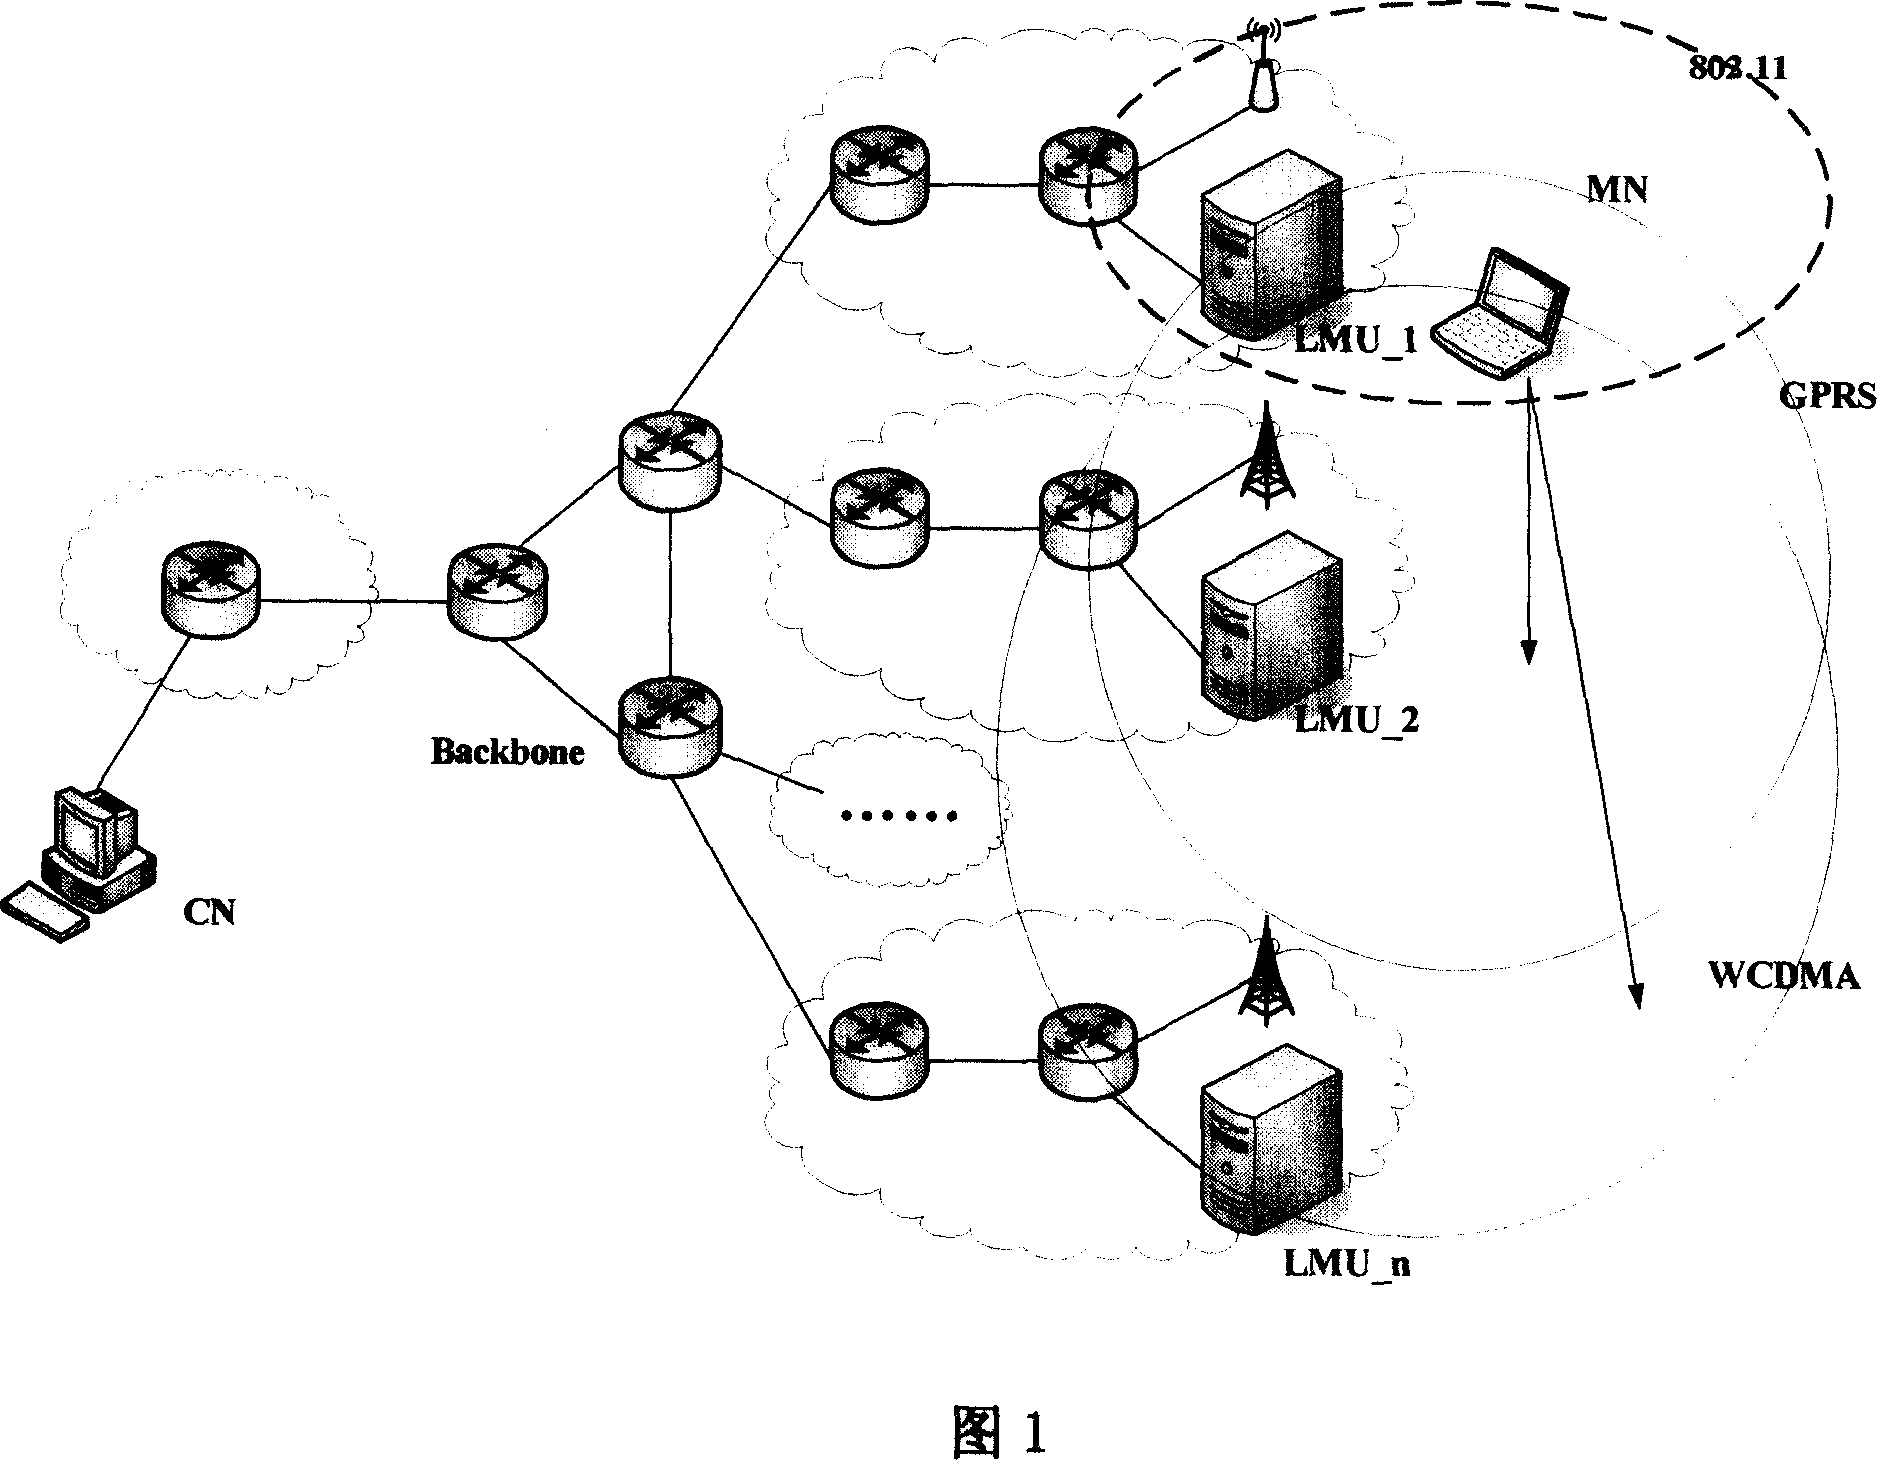 A MIPv6 vertical switching and control method under the overlapping multi-mode network environment